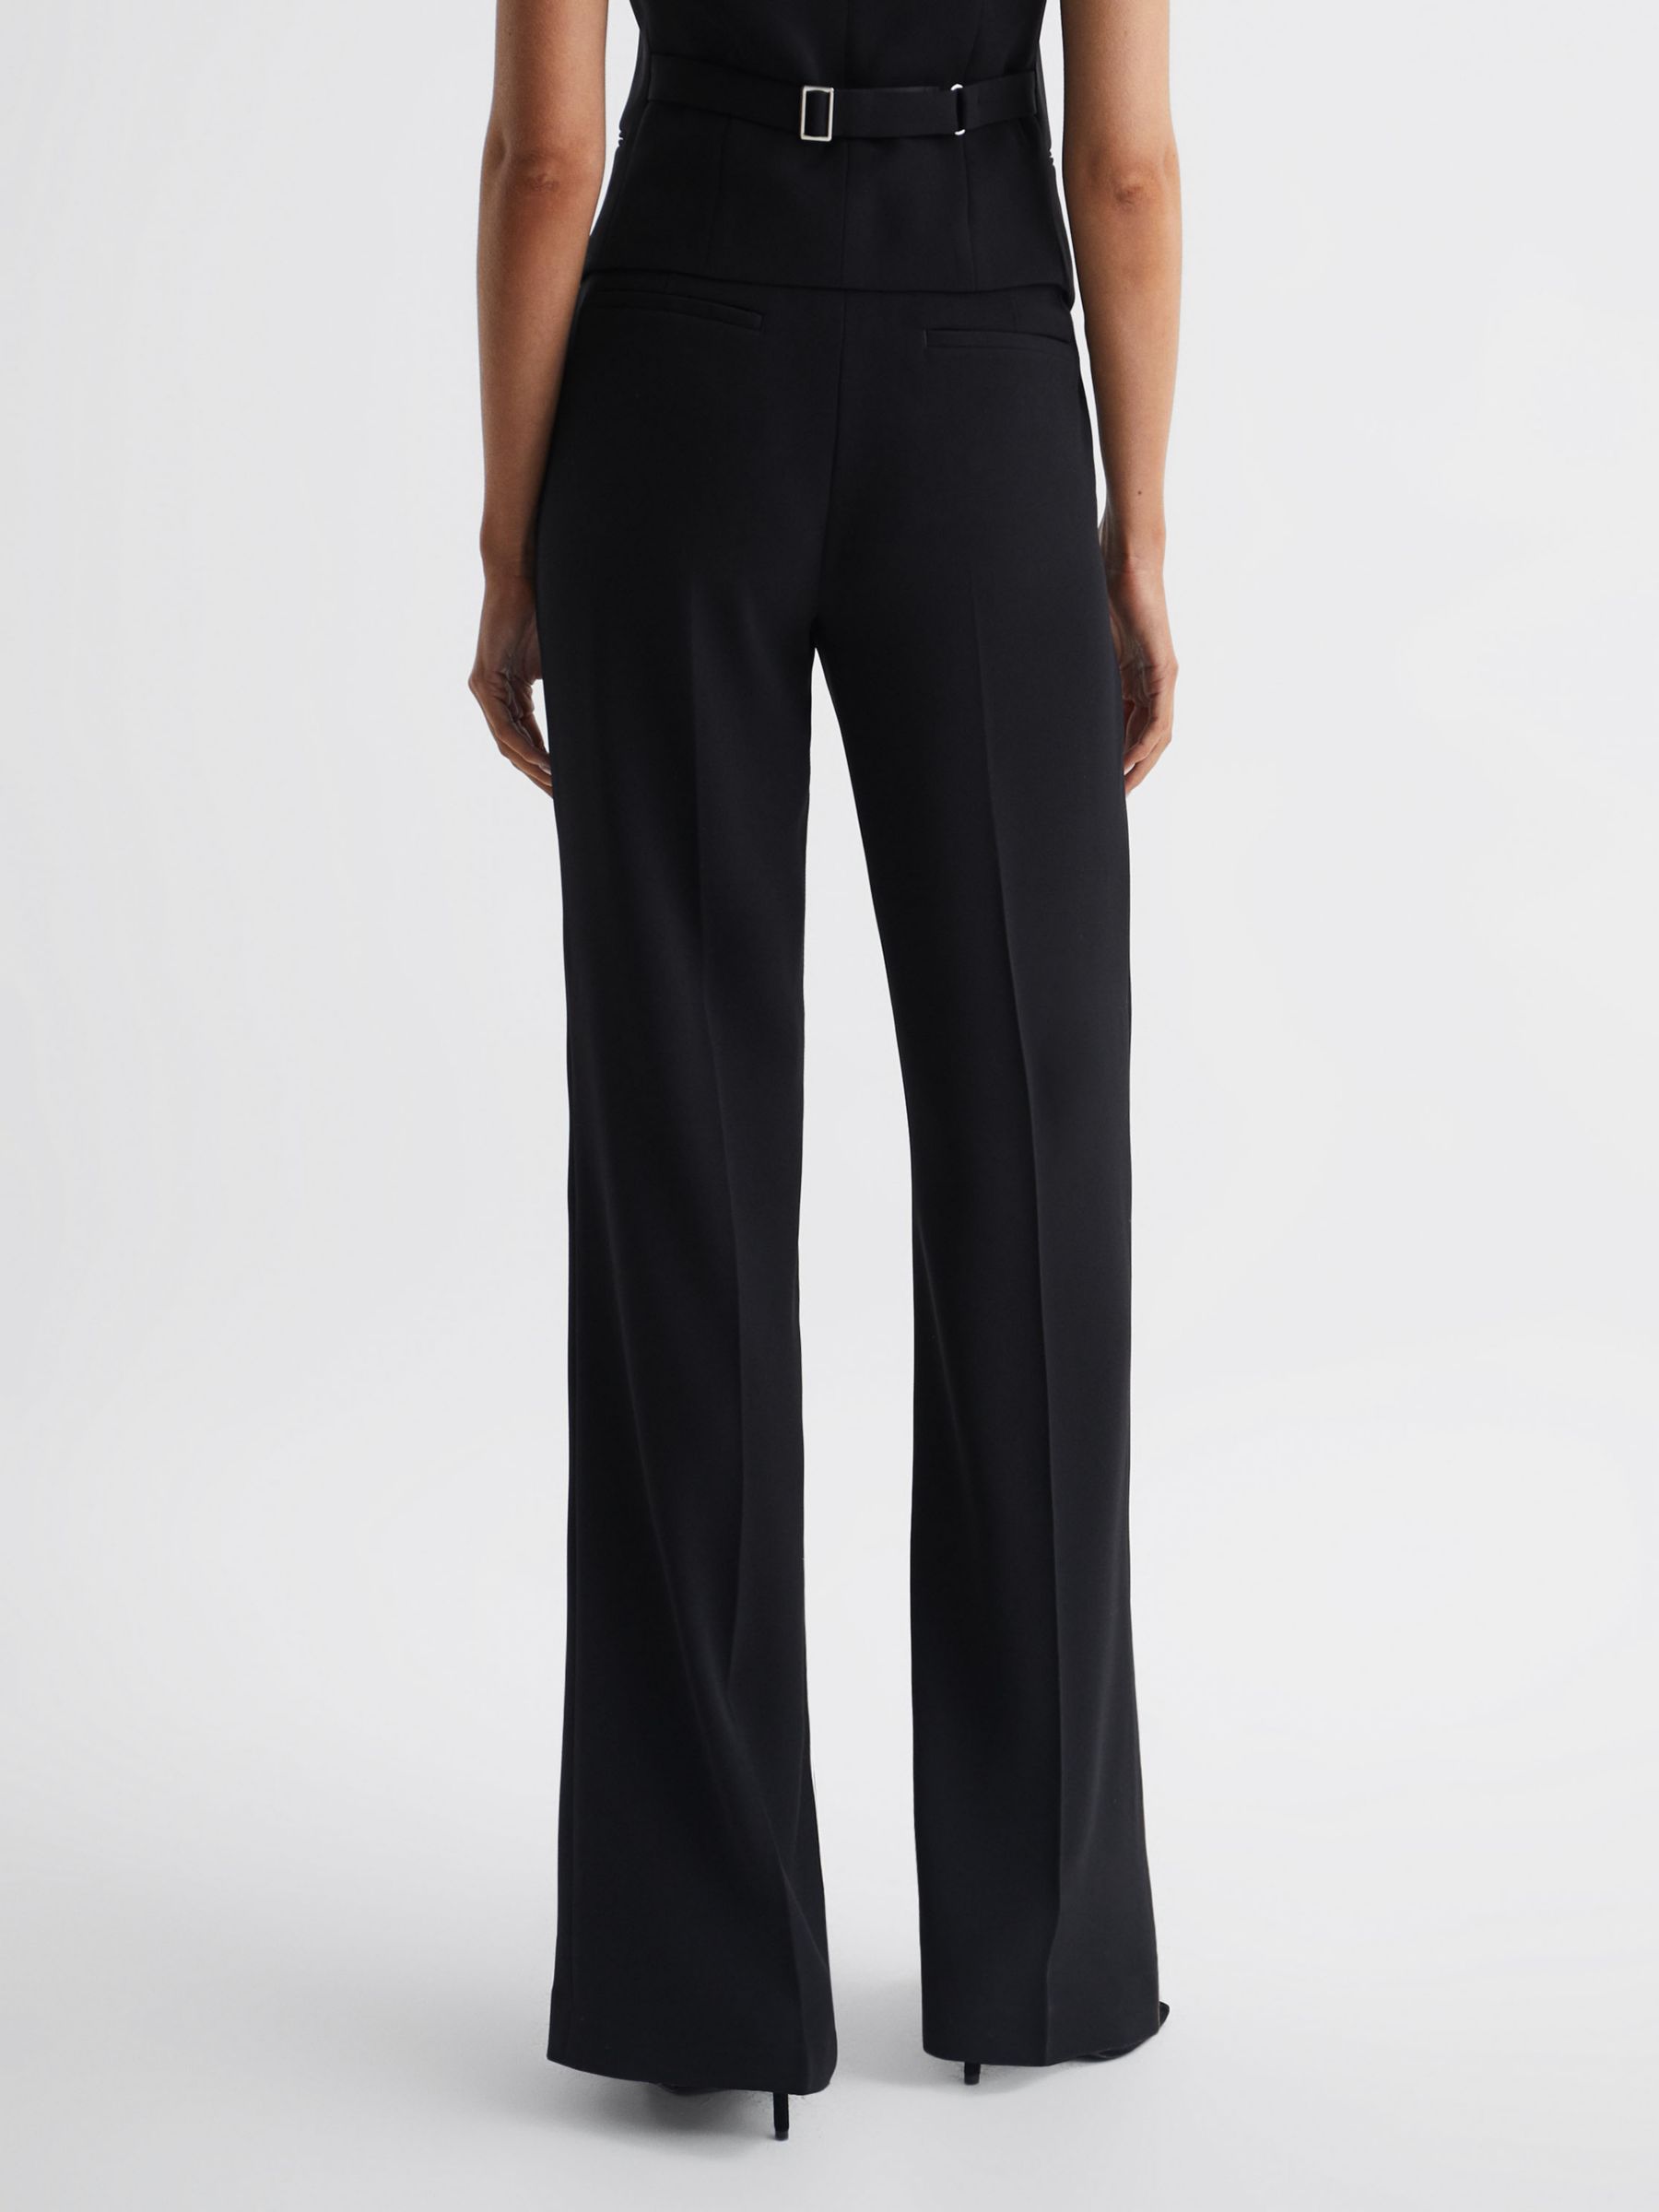 Reiss Margeaux Tailored Trousers, Black at John Lewis & Partners